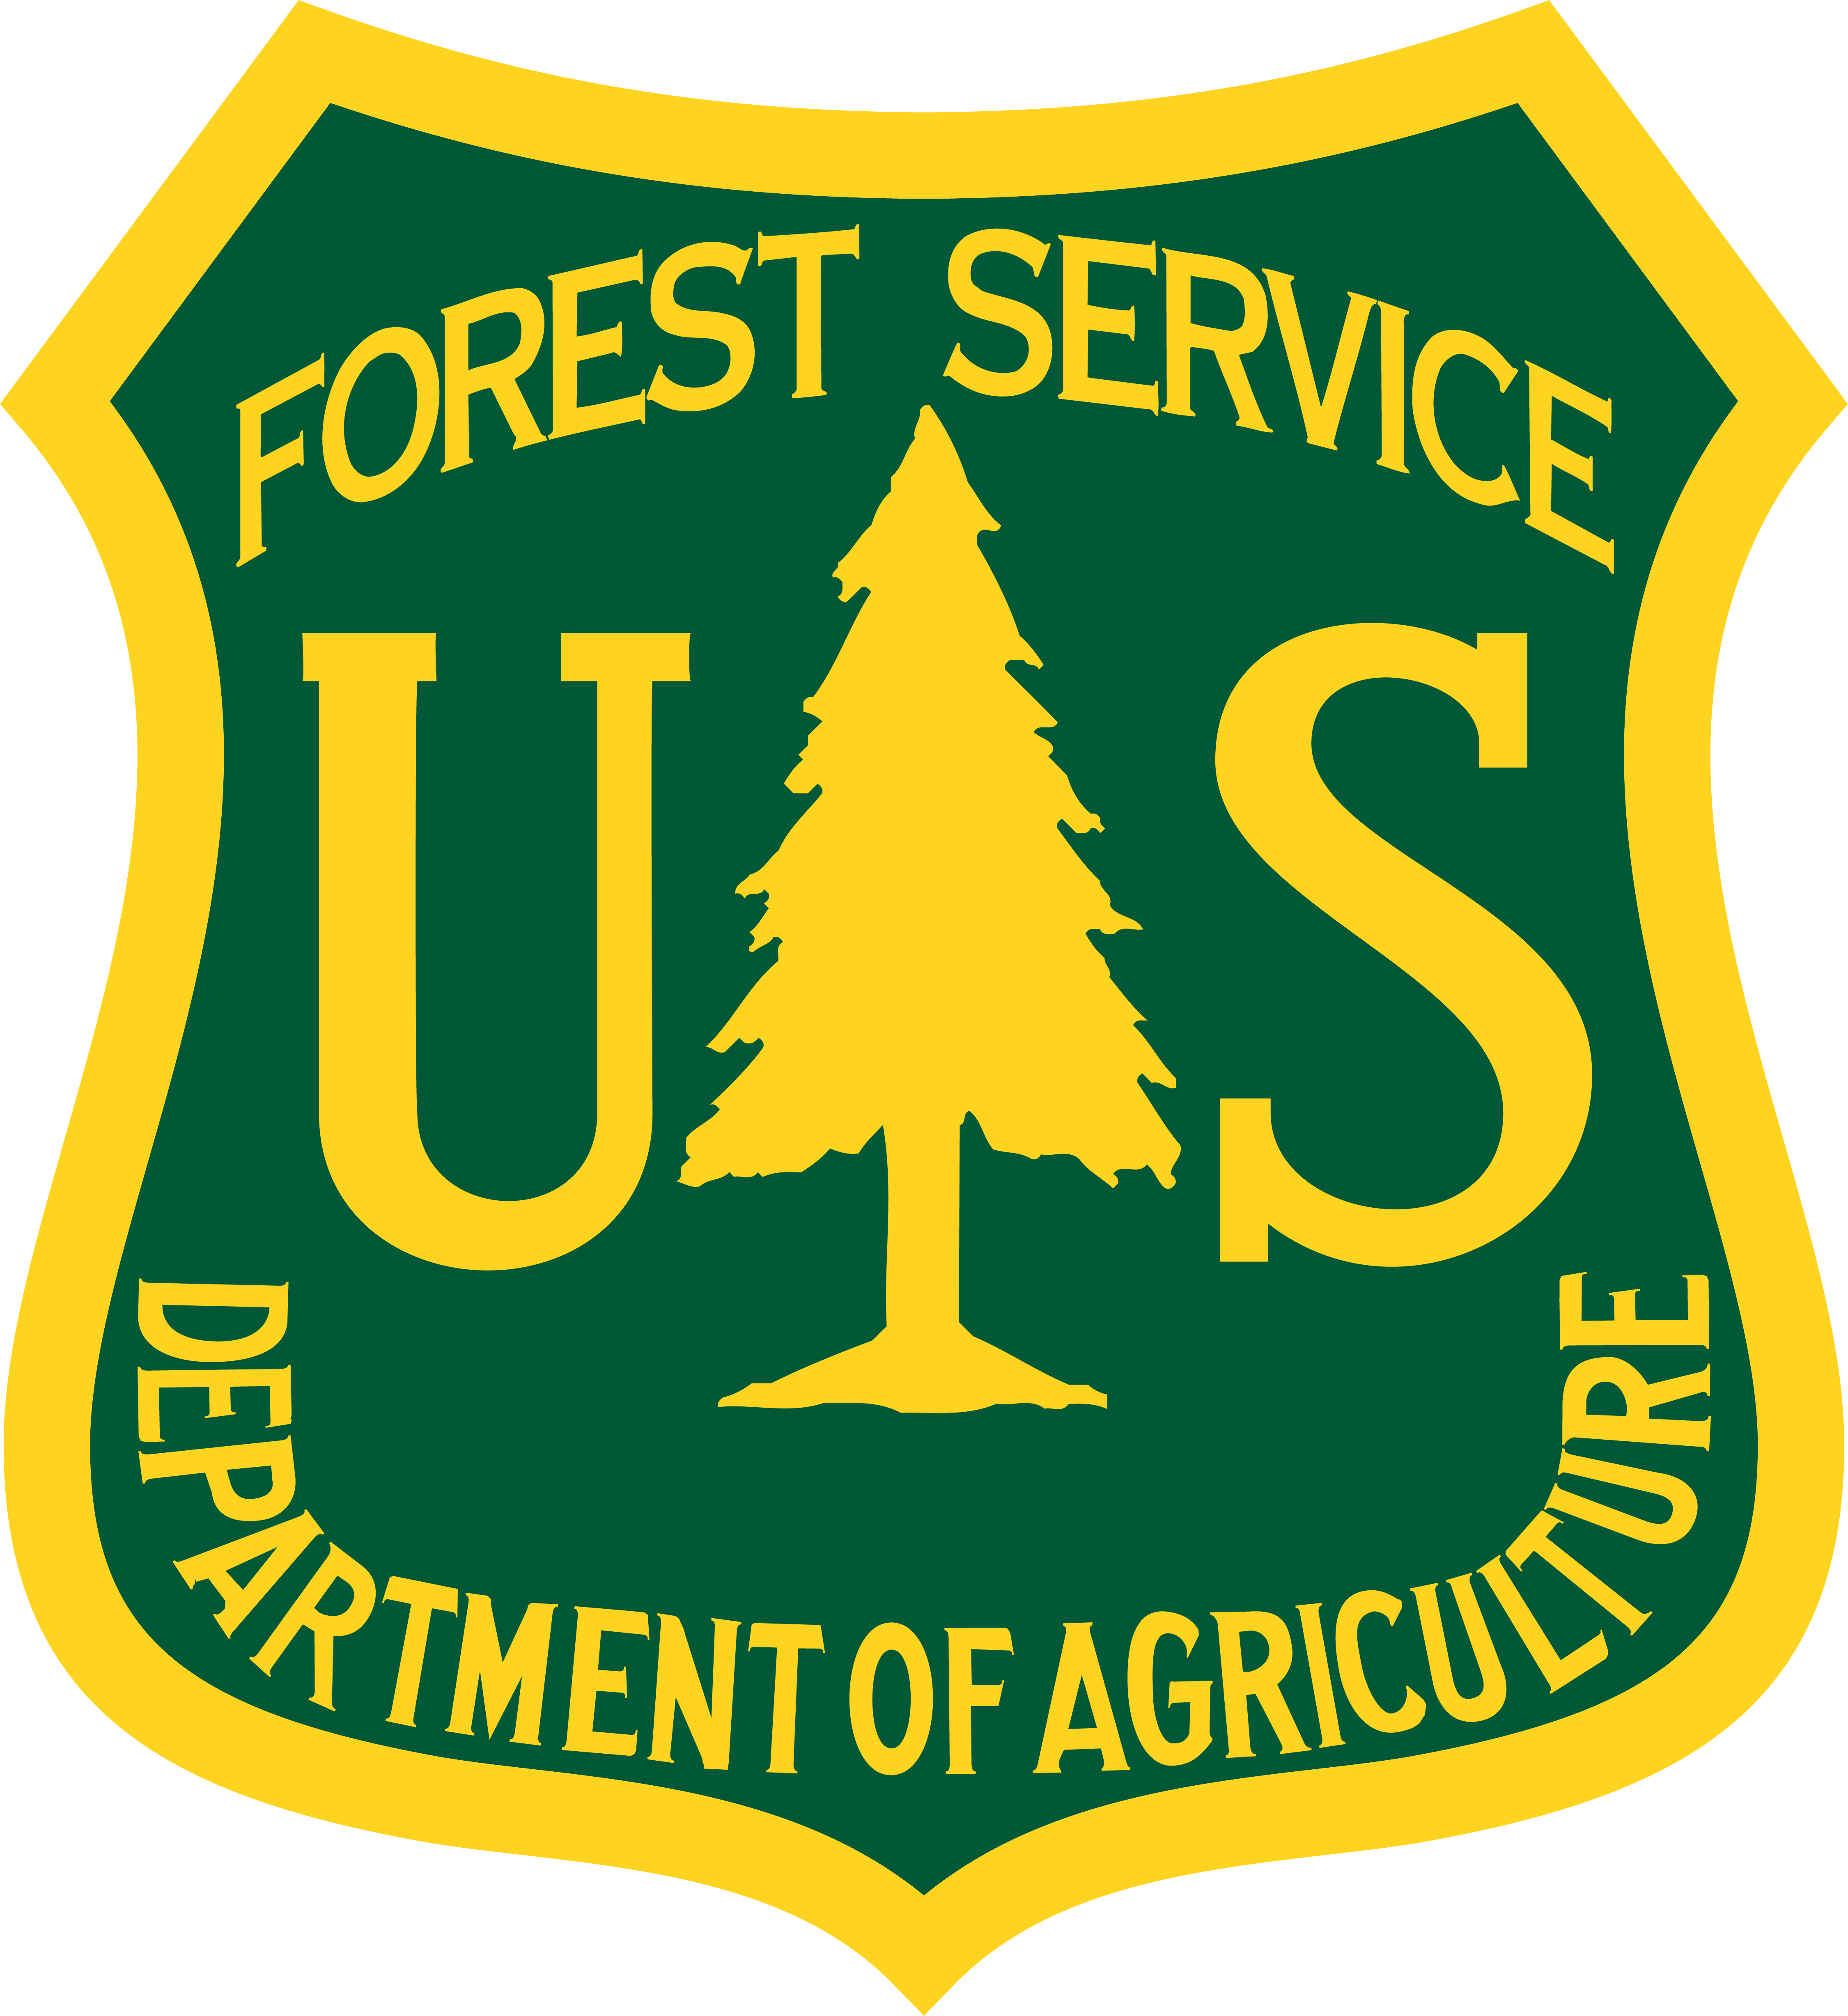 U. S. Forest Service and the Department of Agriculture (USFSDA)